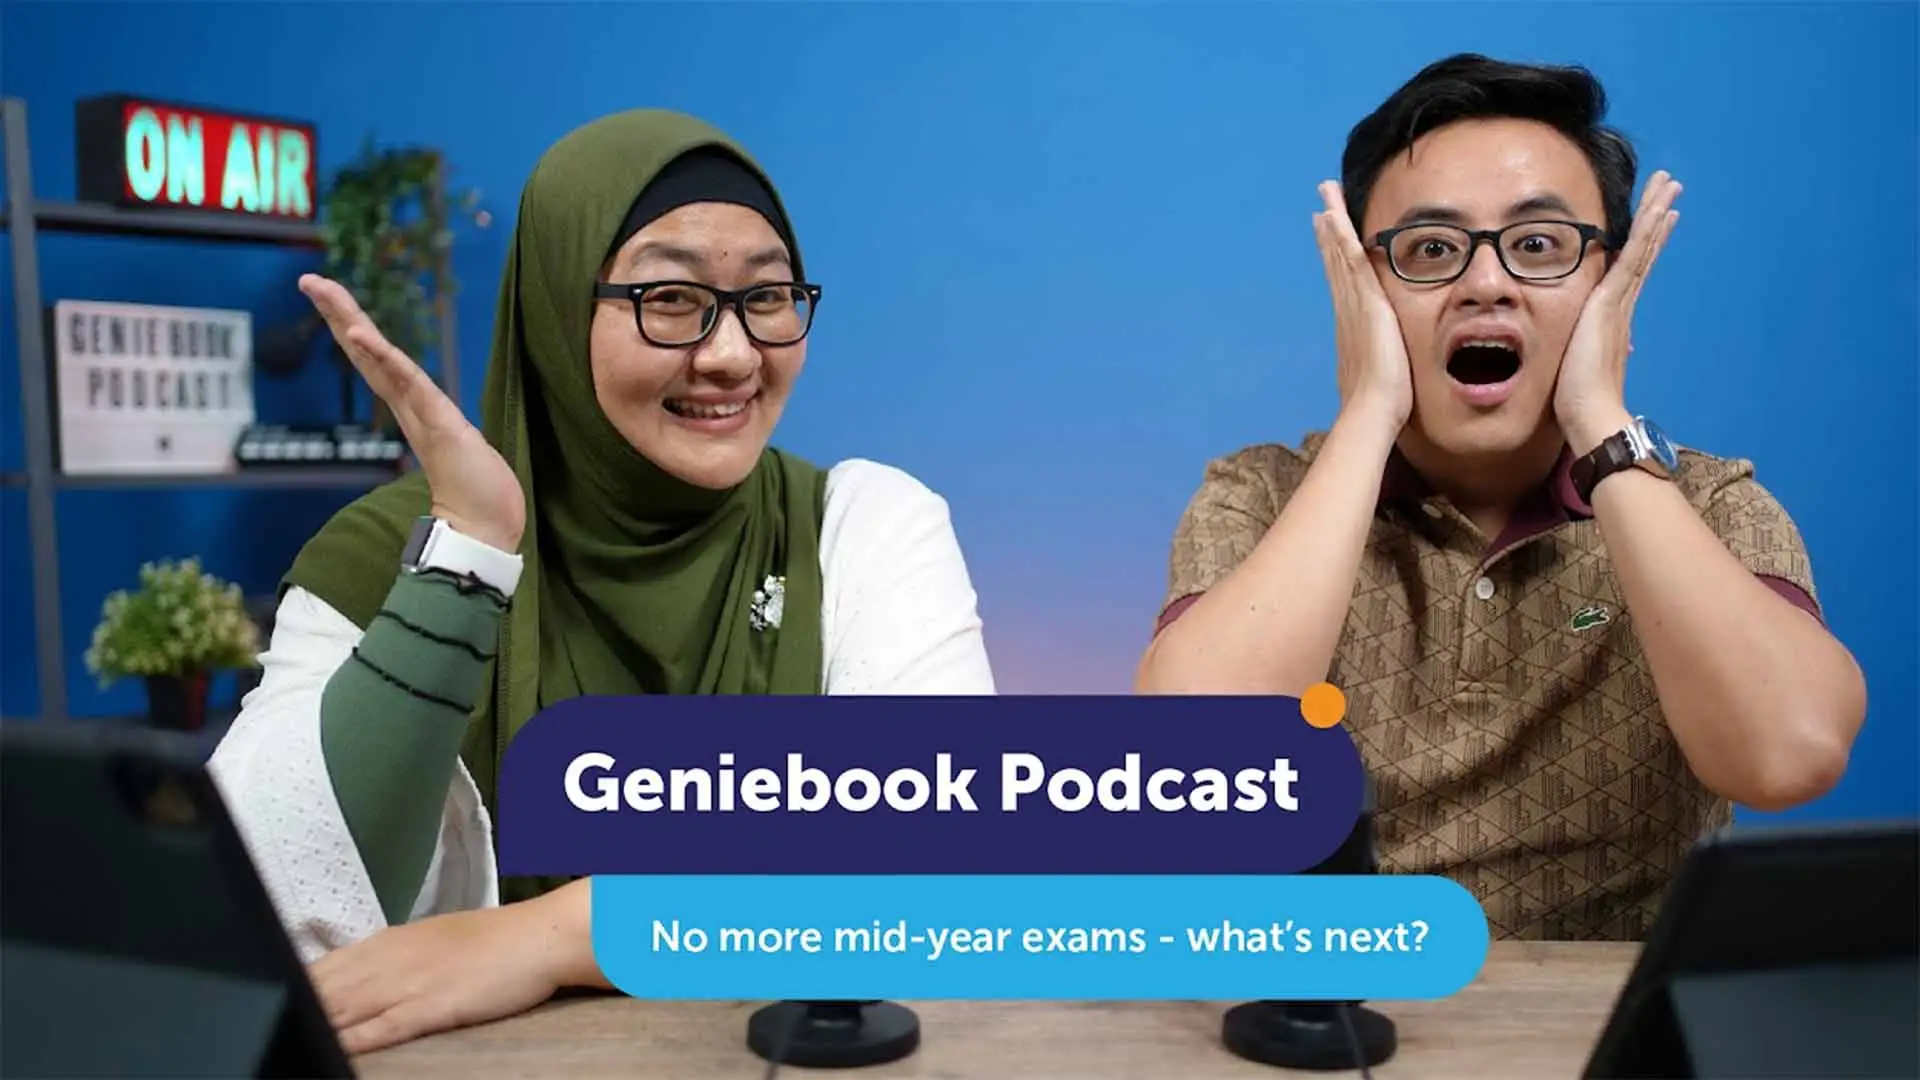 Geniebook Podcast: Goodbye mid-year exams, what's next?